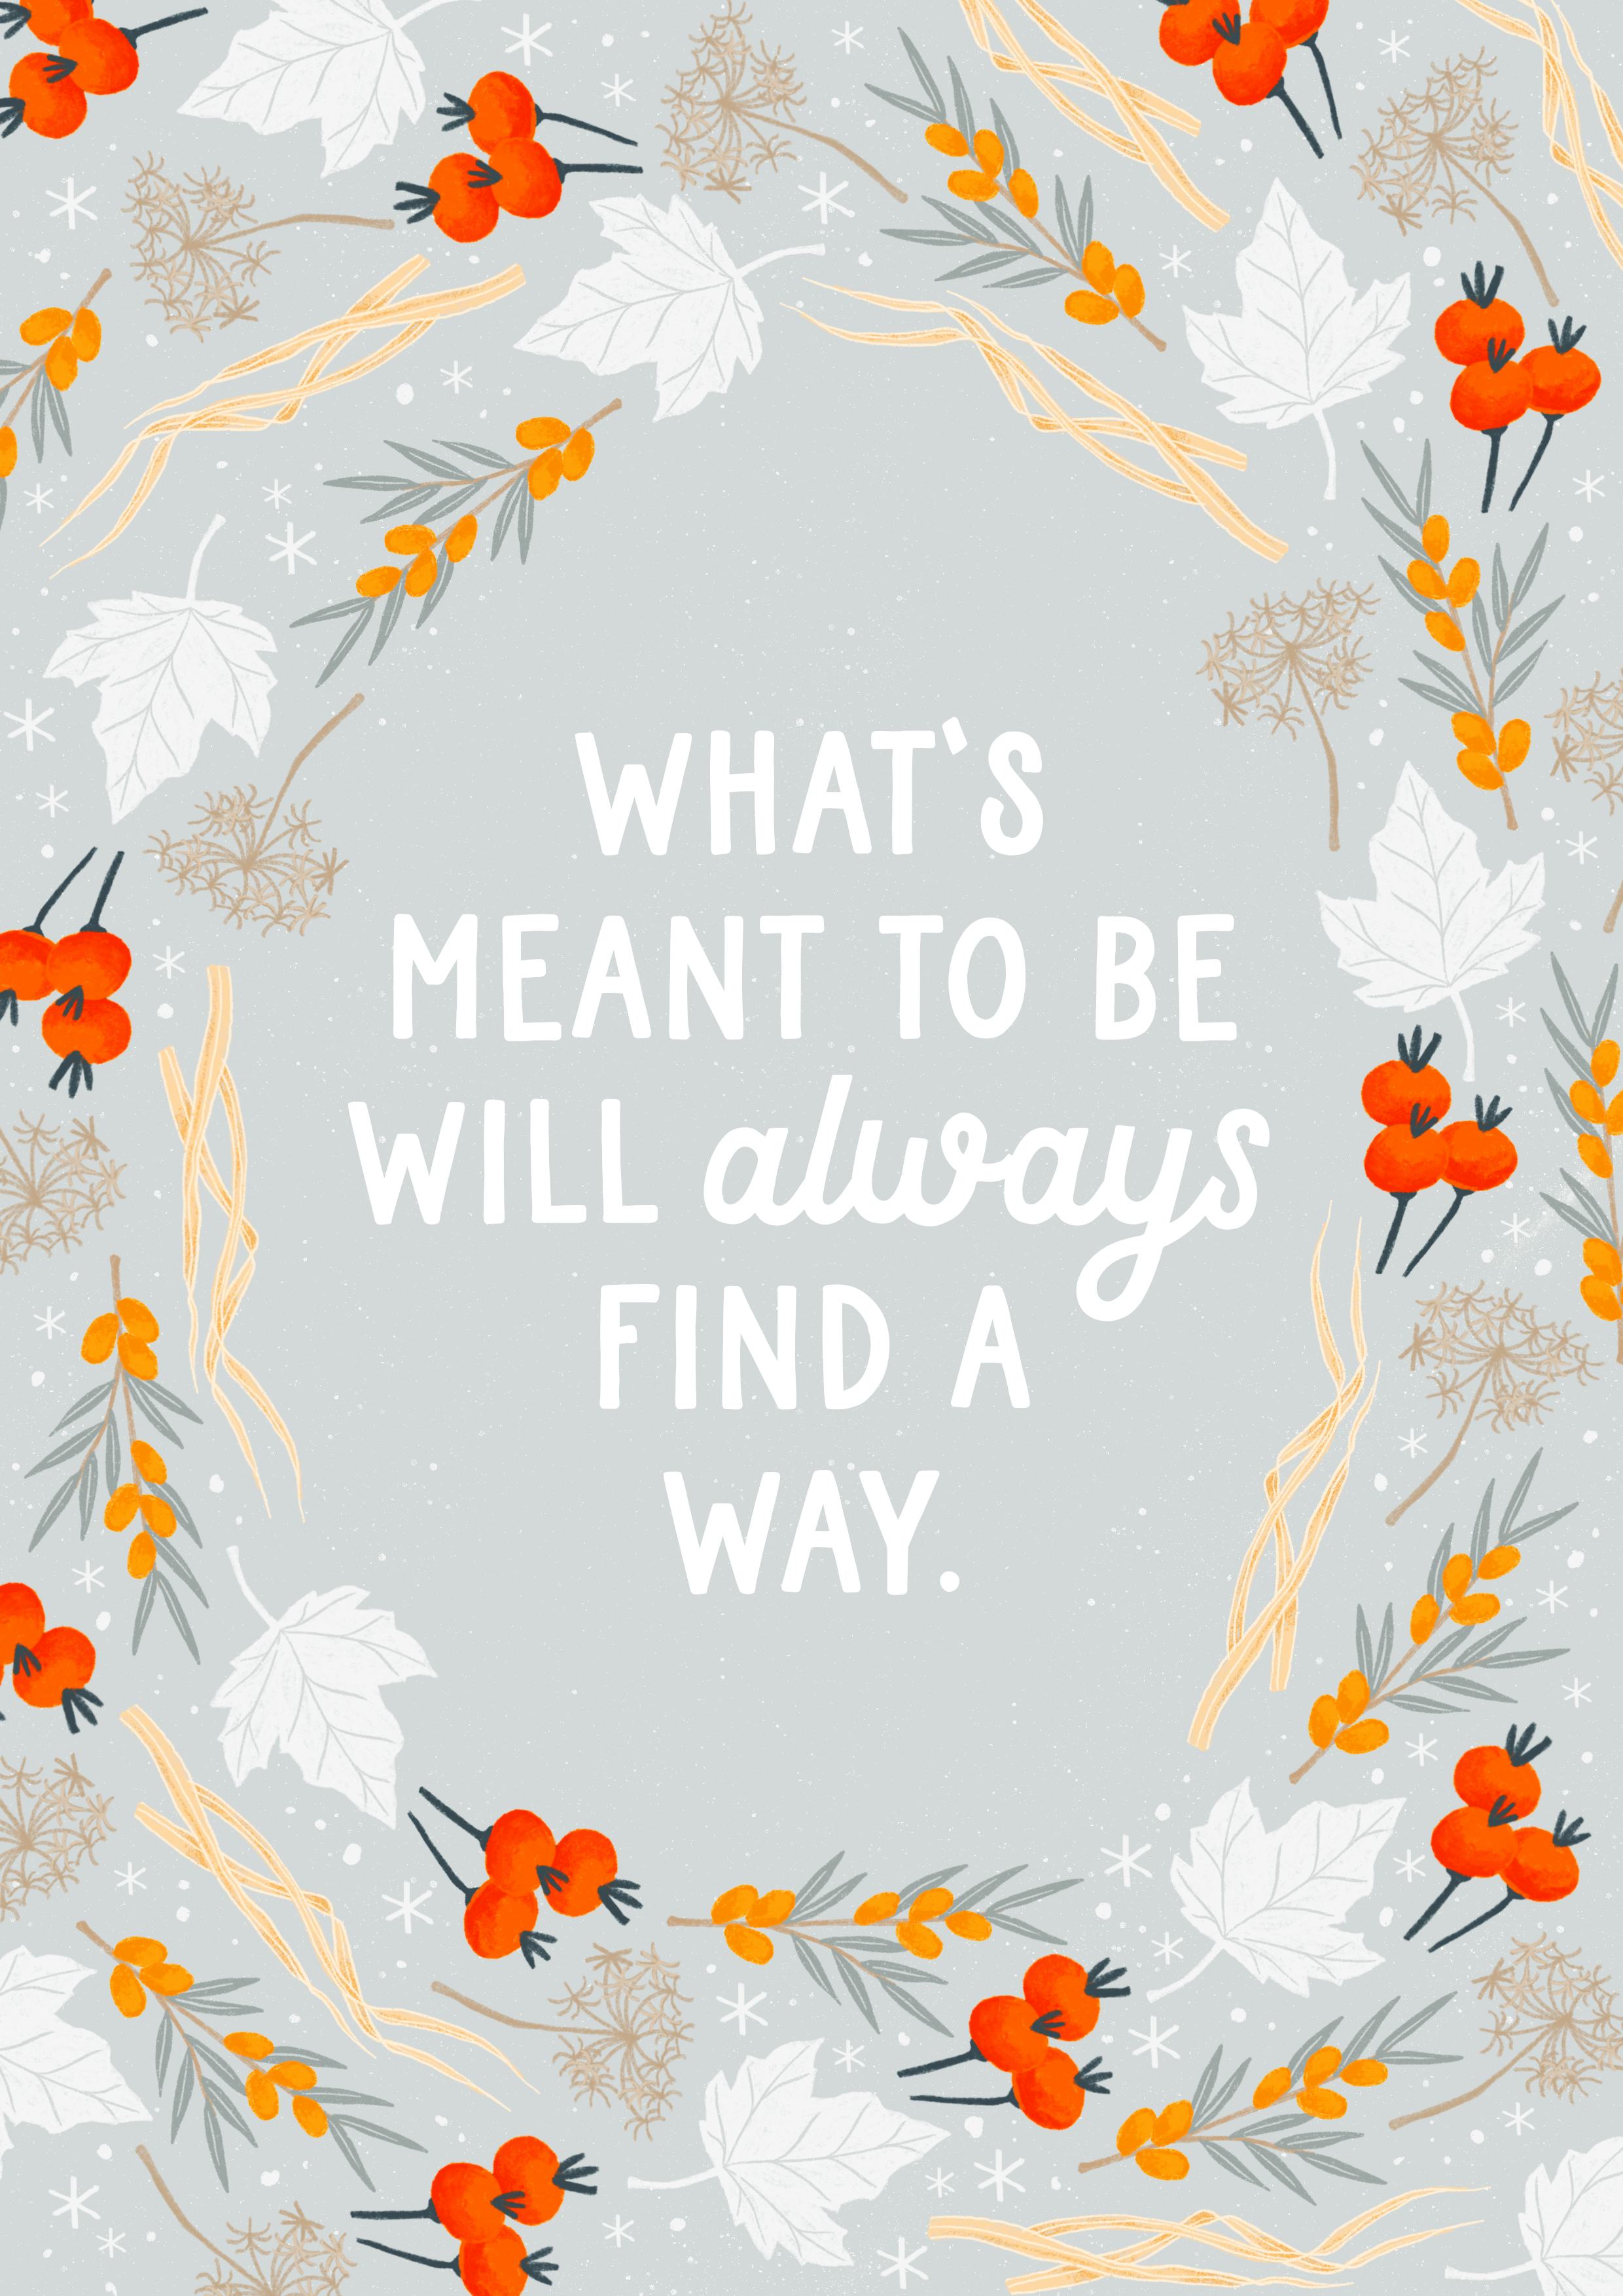 Poster with floral illustration and quote "What'S meant to be will always find a way"